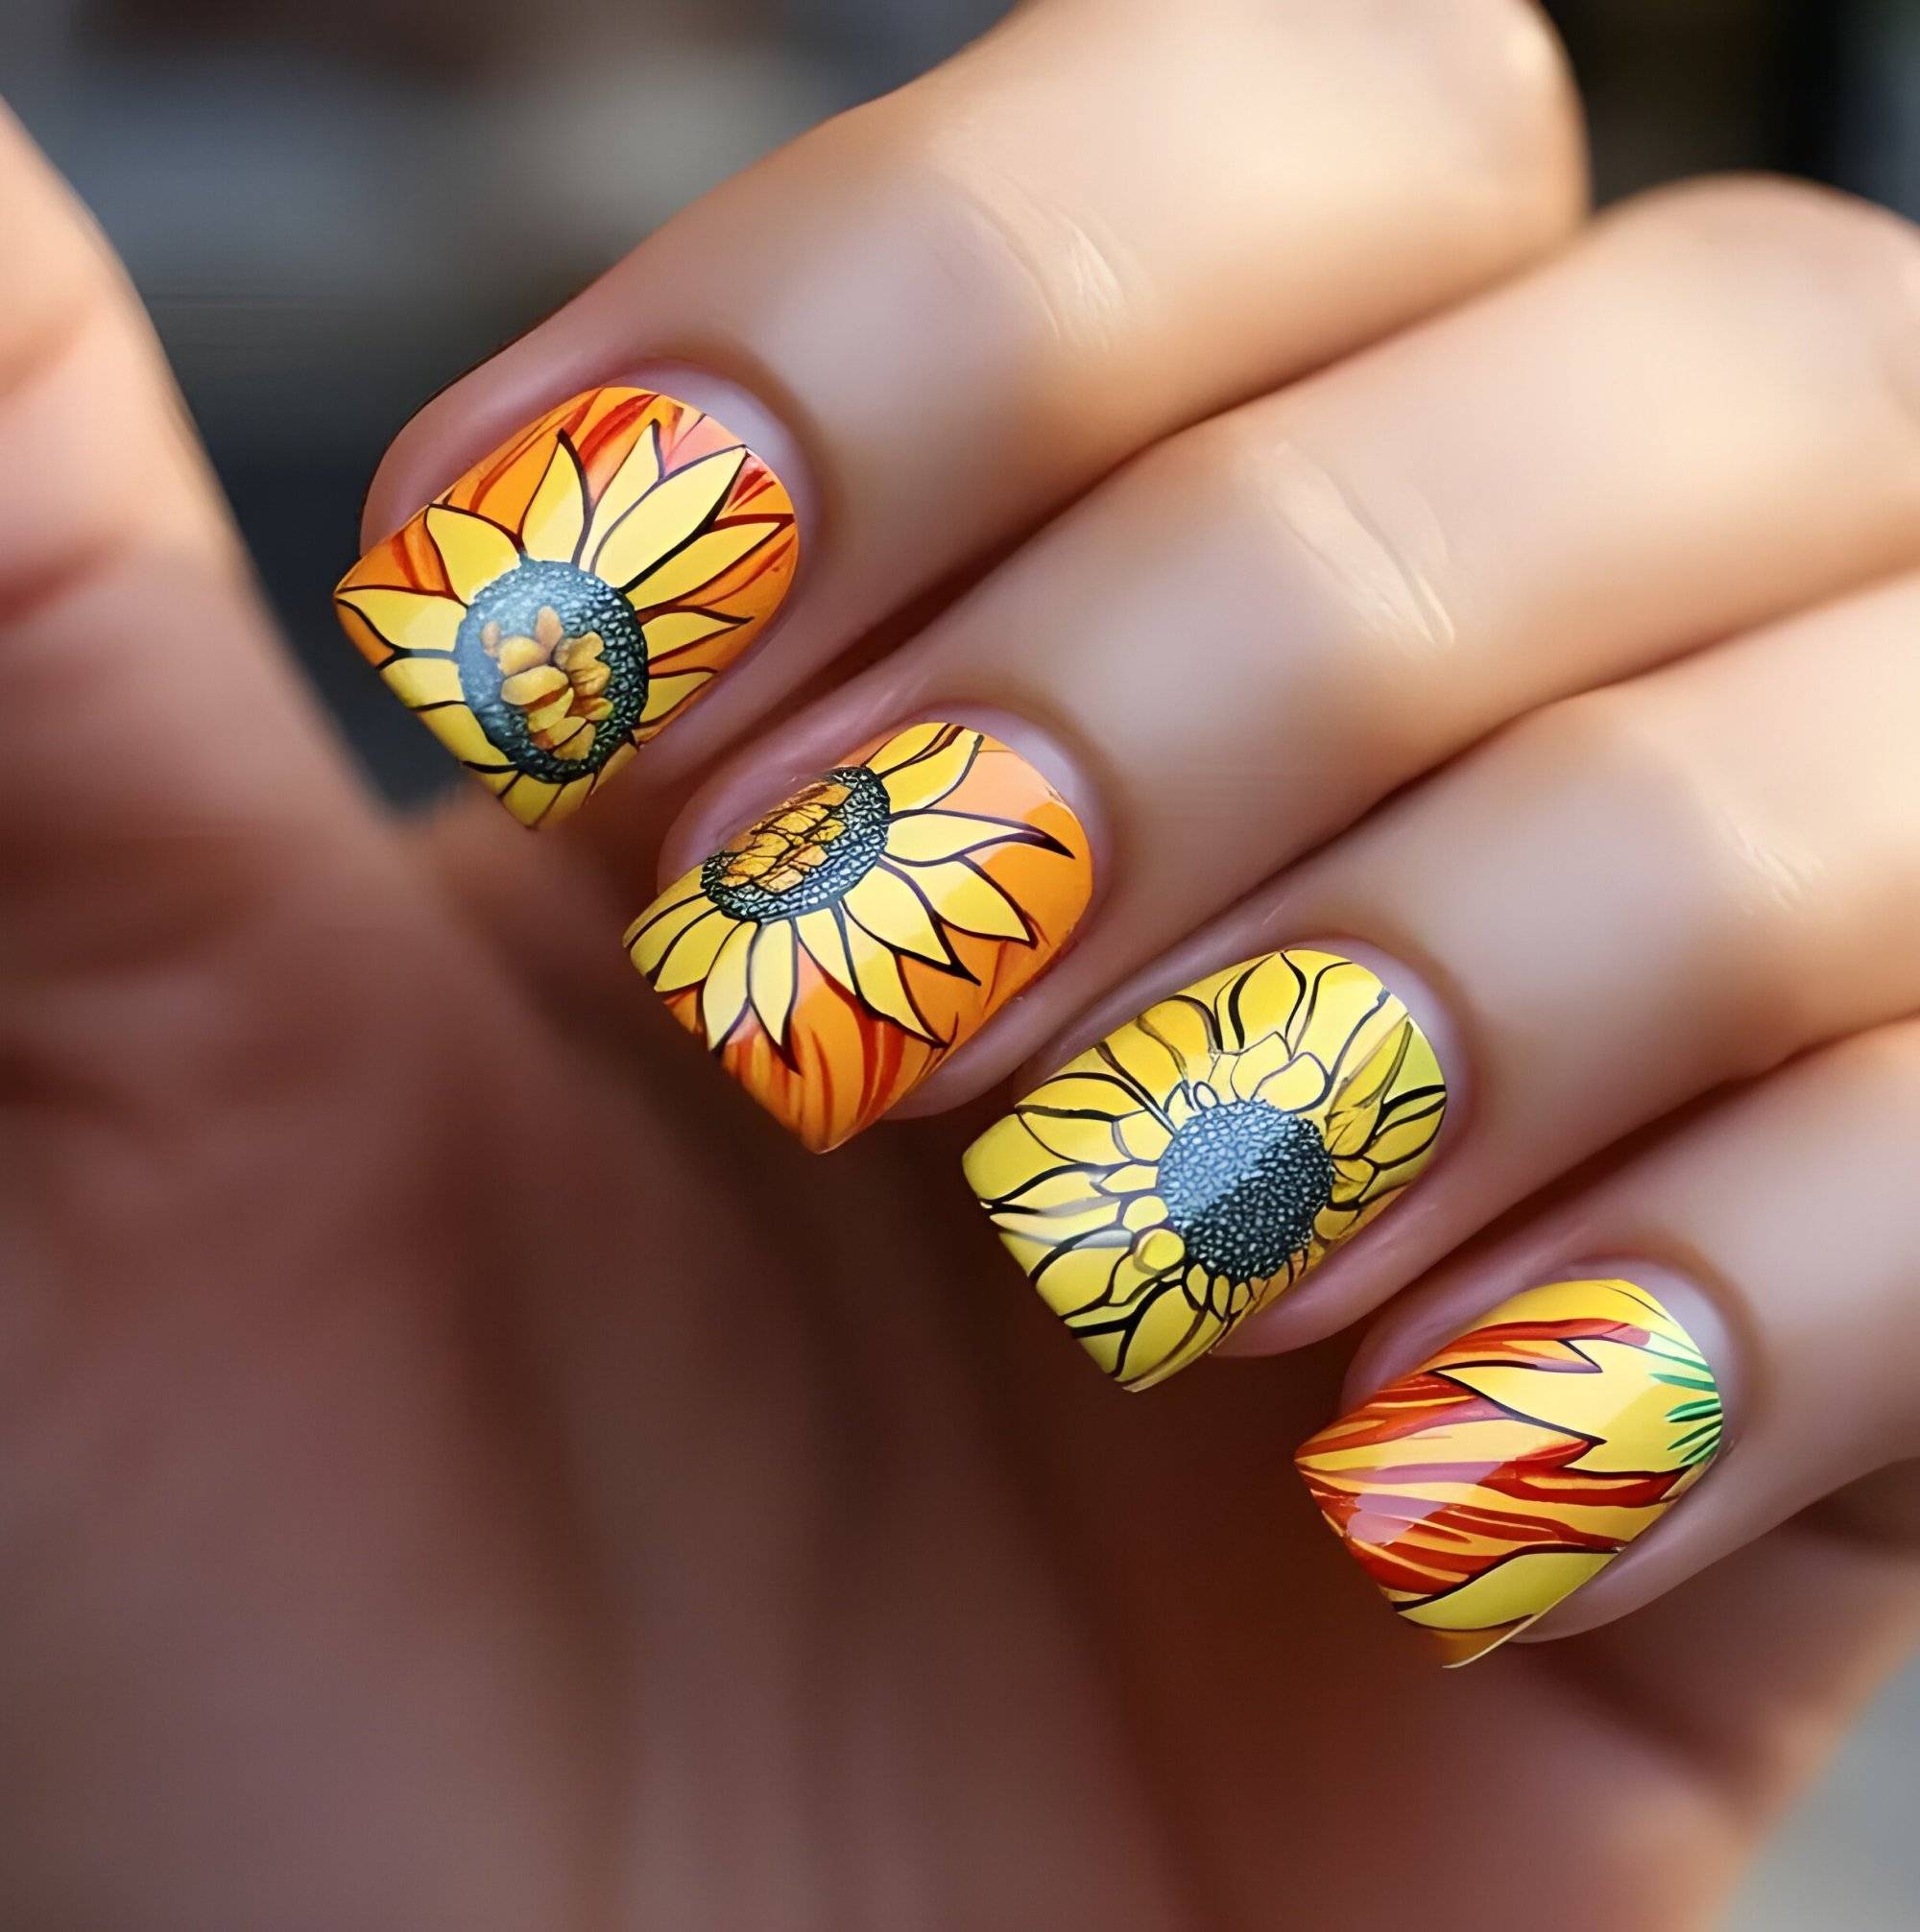 25 Trendy Summer Sunflower Nails For Beginners To Copy ASAP - 185